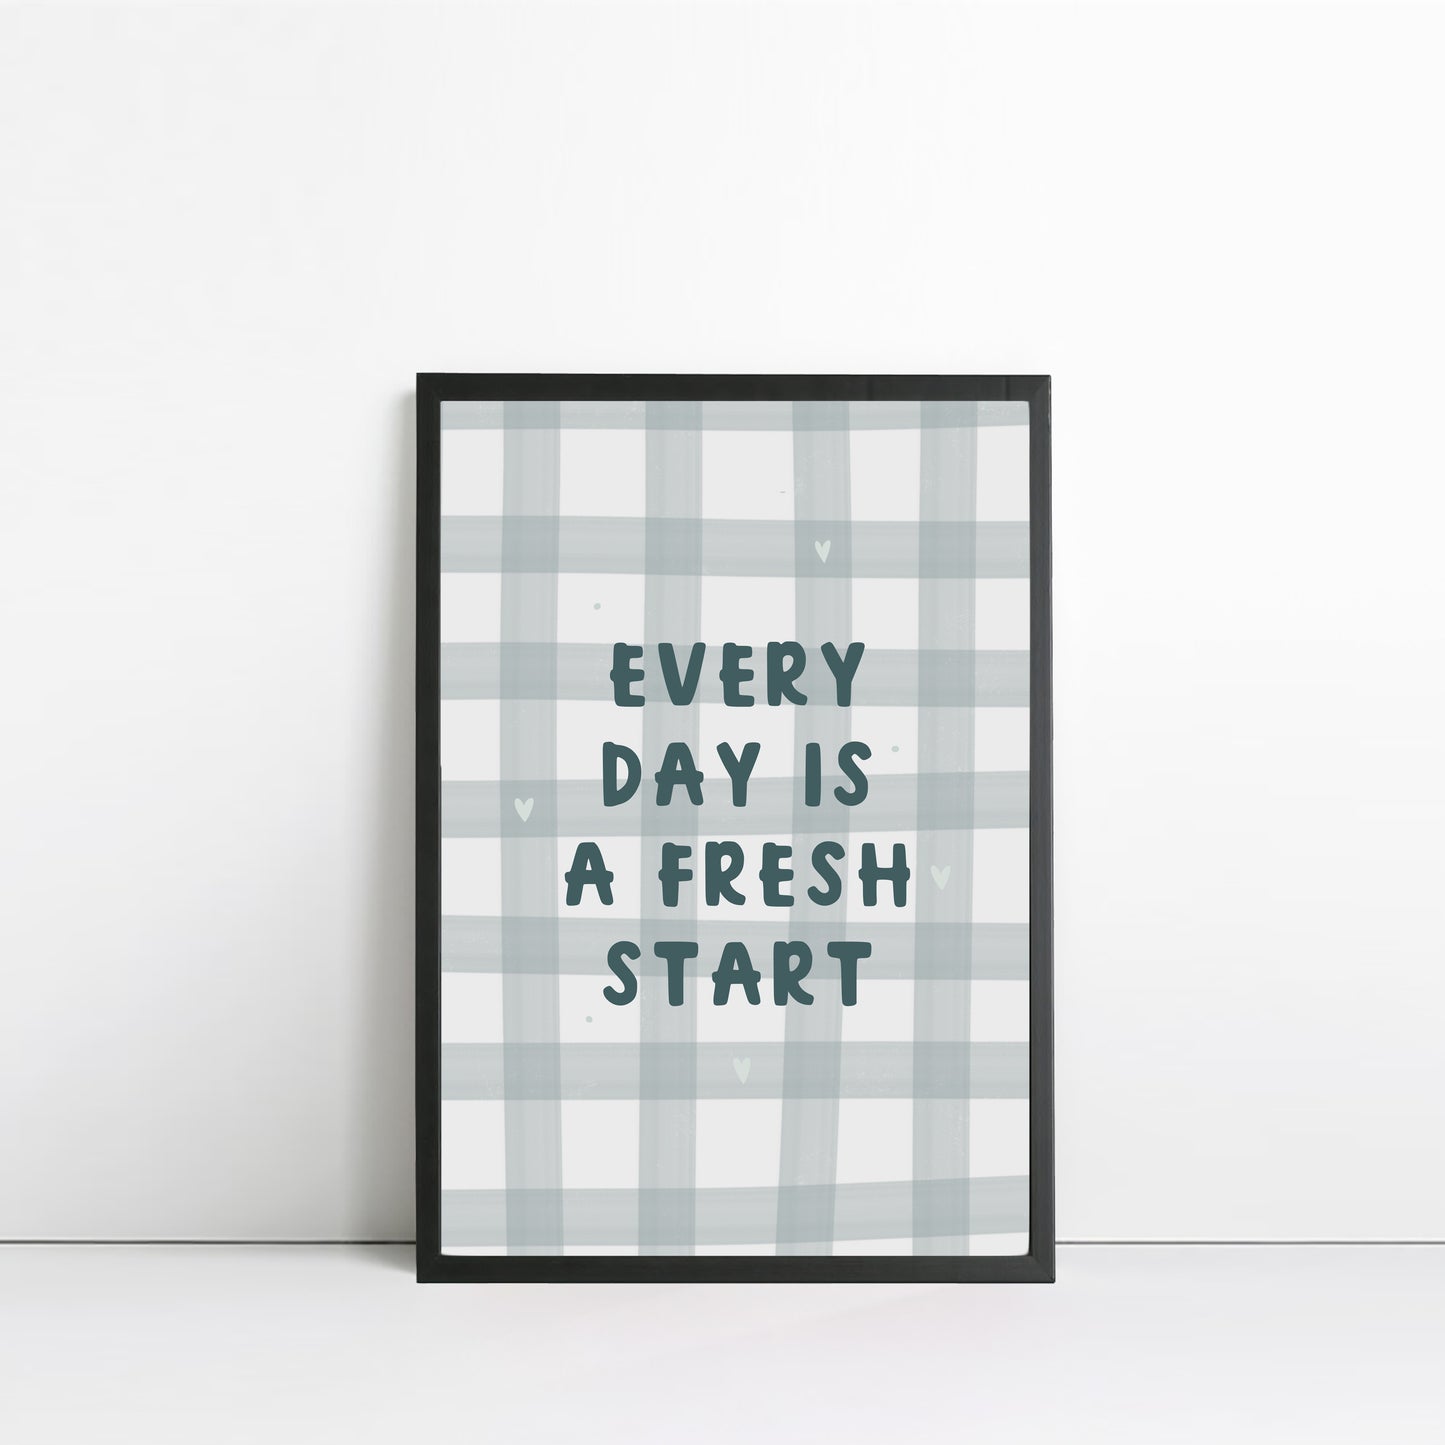 Every day is a fresh start mental health print by Abbie Imagine